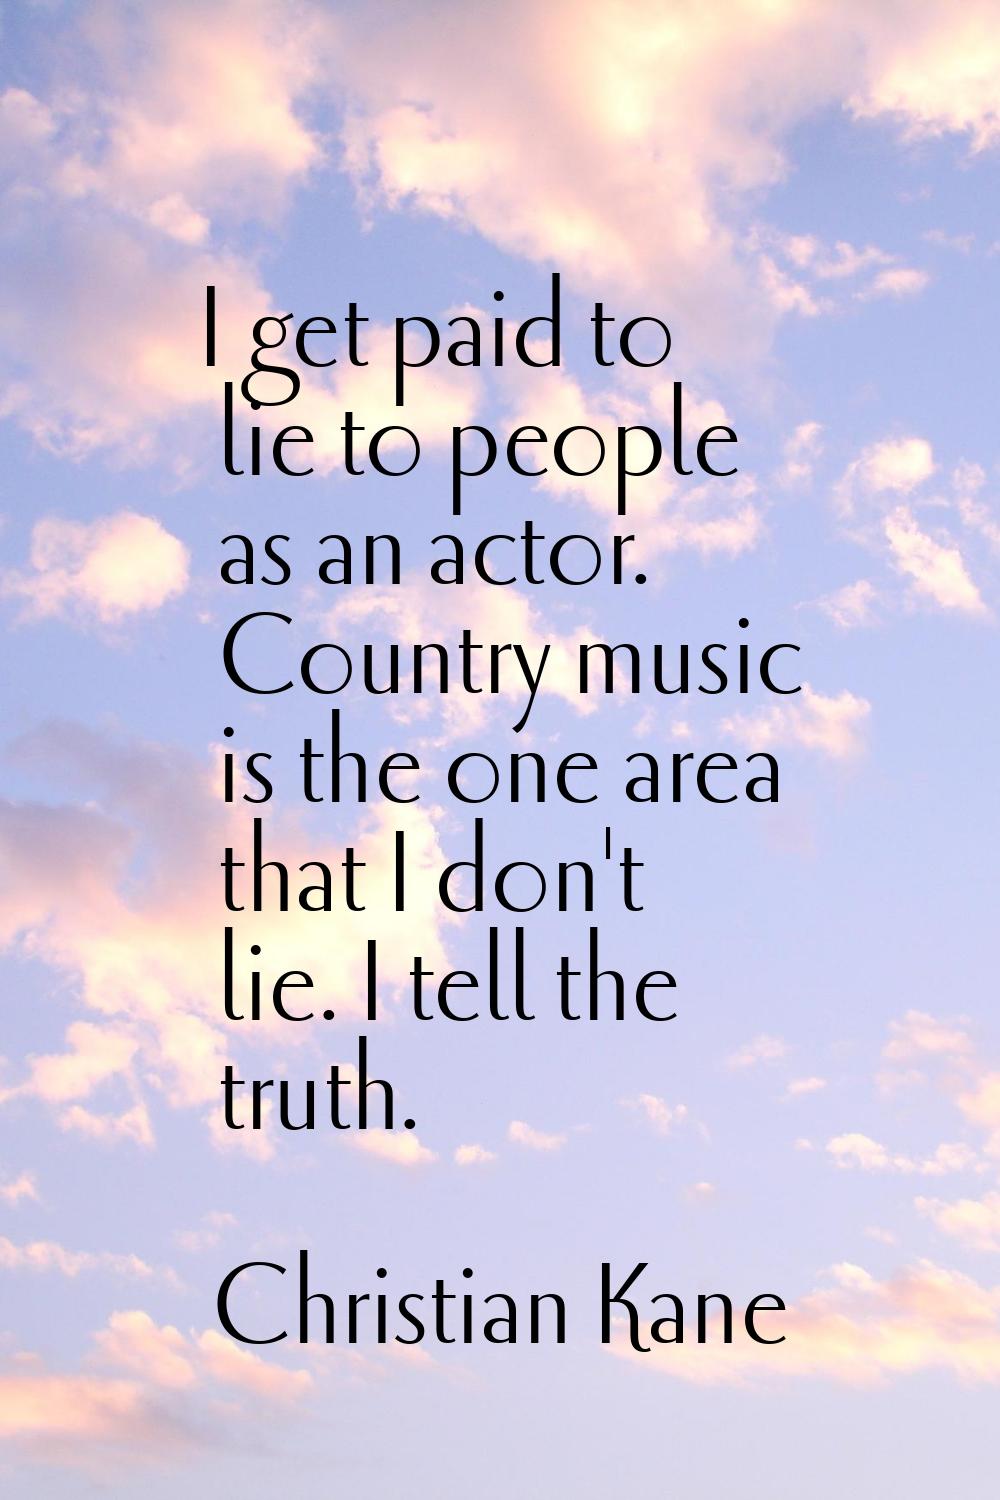 I get paid to lie to people as an actor. Country music is the one area that I don't lie. I tell the